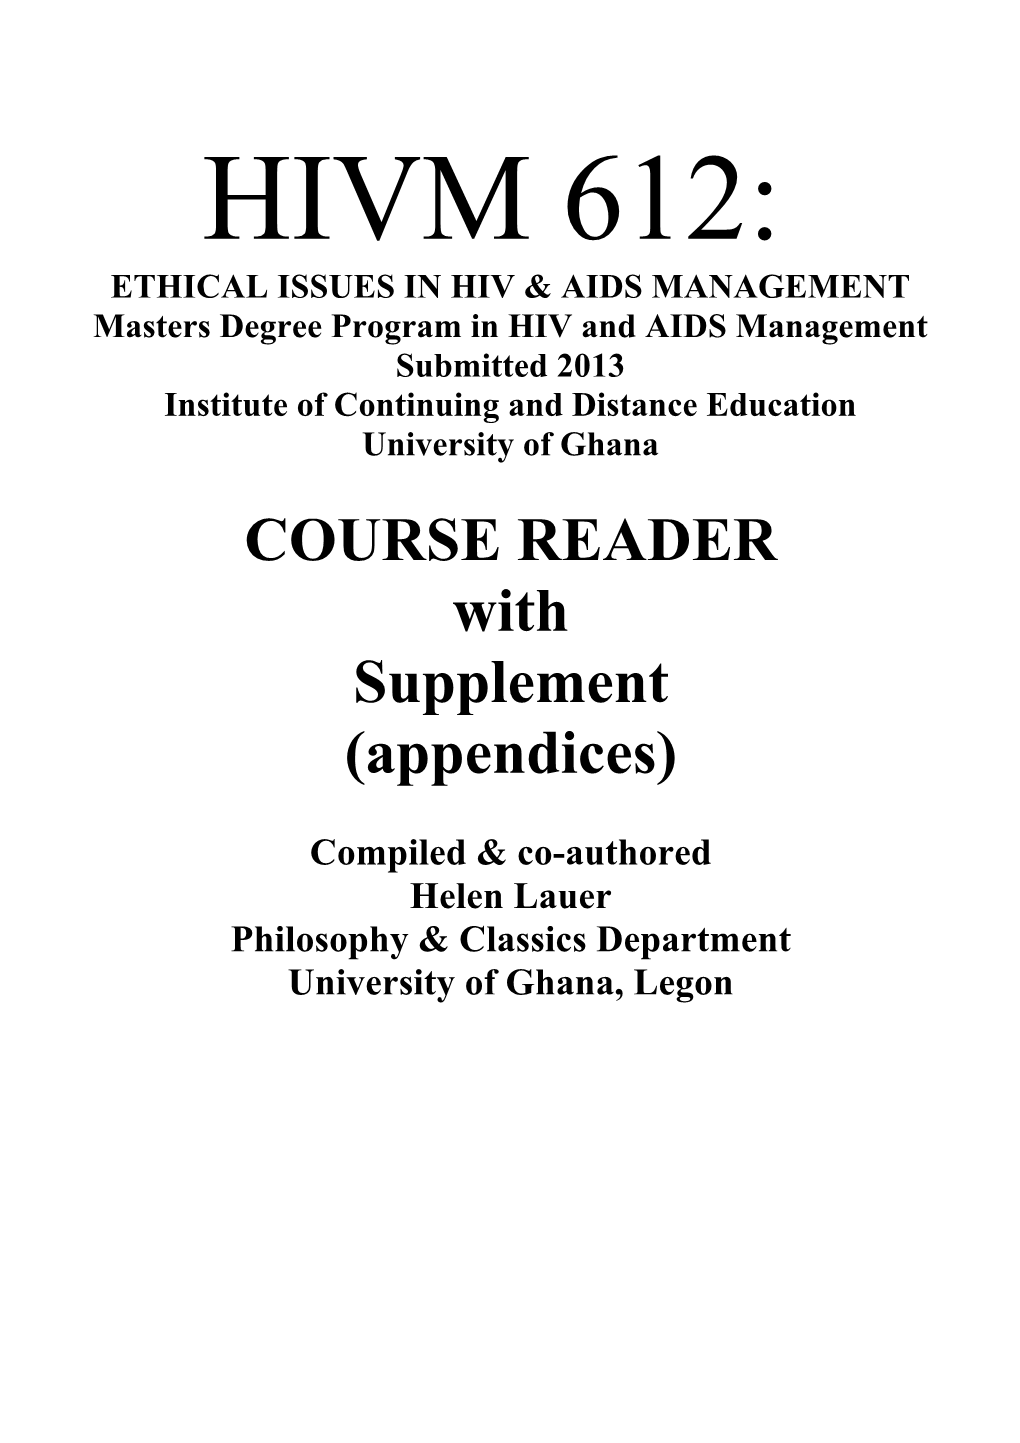 COURSE READER with Supplement (Appendices)